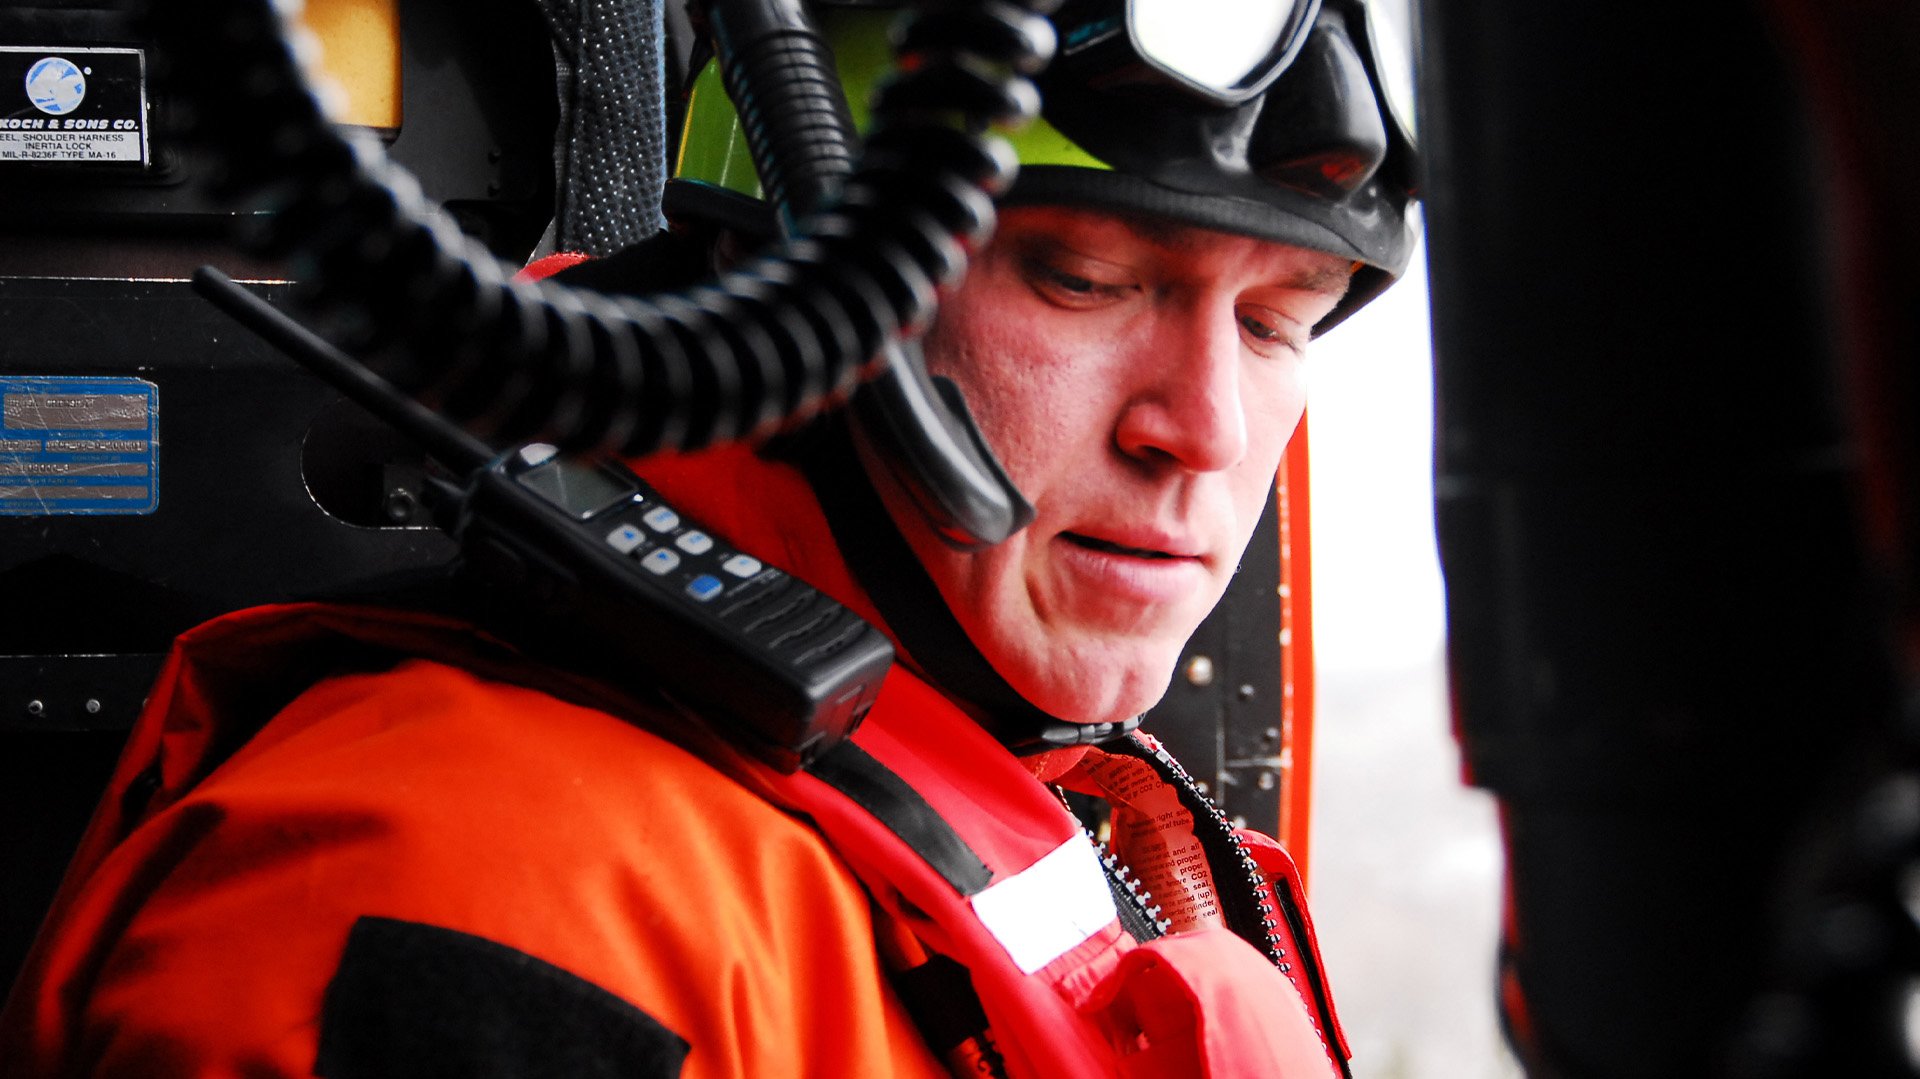 A US Coast Guard rescue swimmer gears up, ready for deployment to an emergency. US Coast Guard photo by Petty Officer 3rd Class Brandon Blackwell.